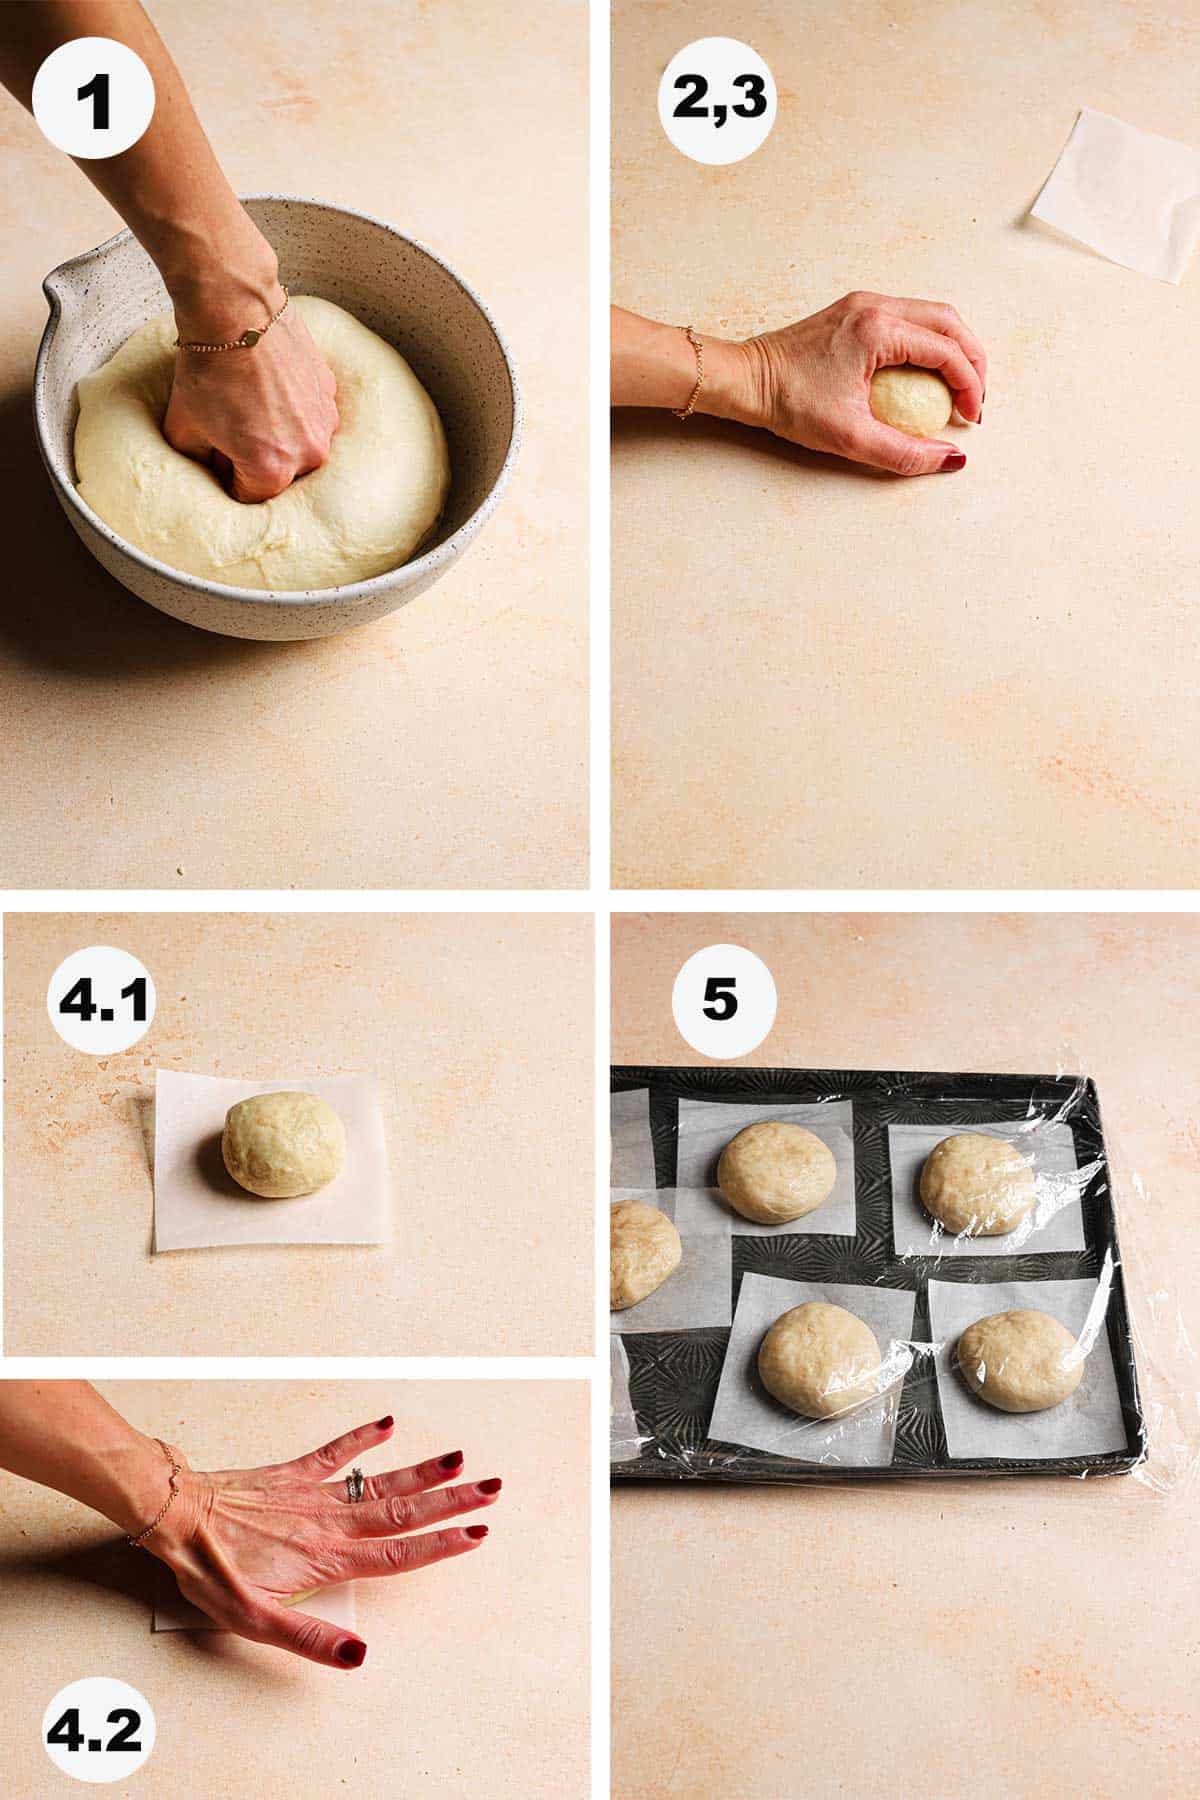 Hand punching dough, and rolling dough, dough on a piece of parchment paper, hand pressing dough down, rolled dough on a baking pan covered with parchment paper.